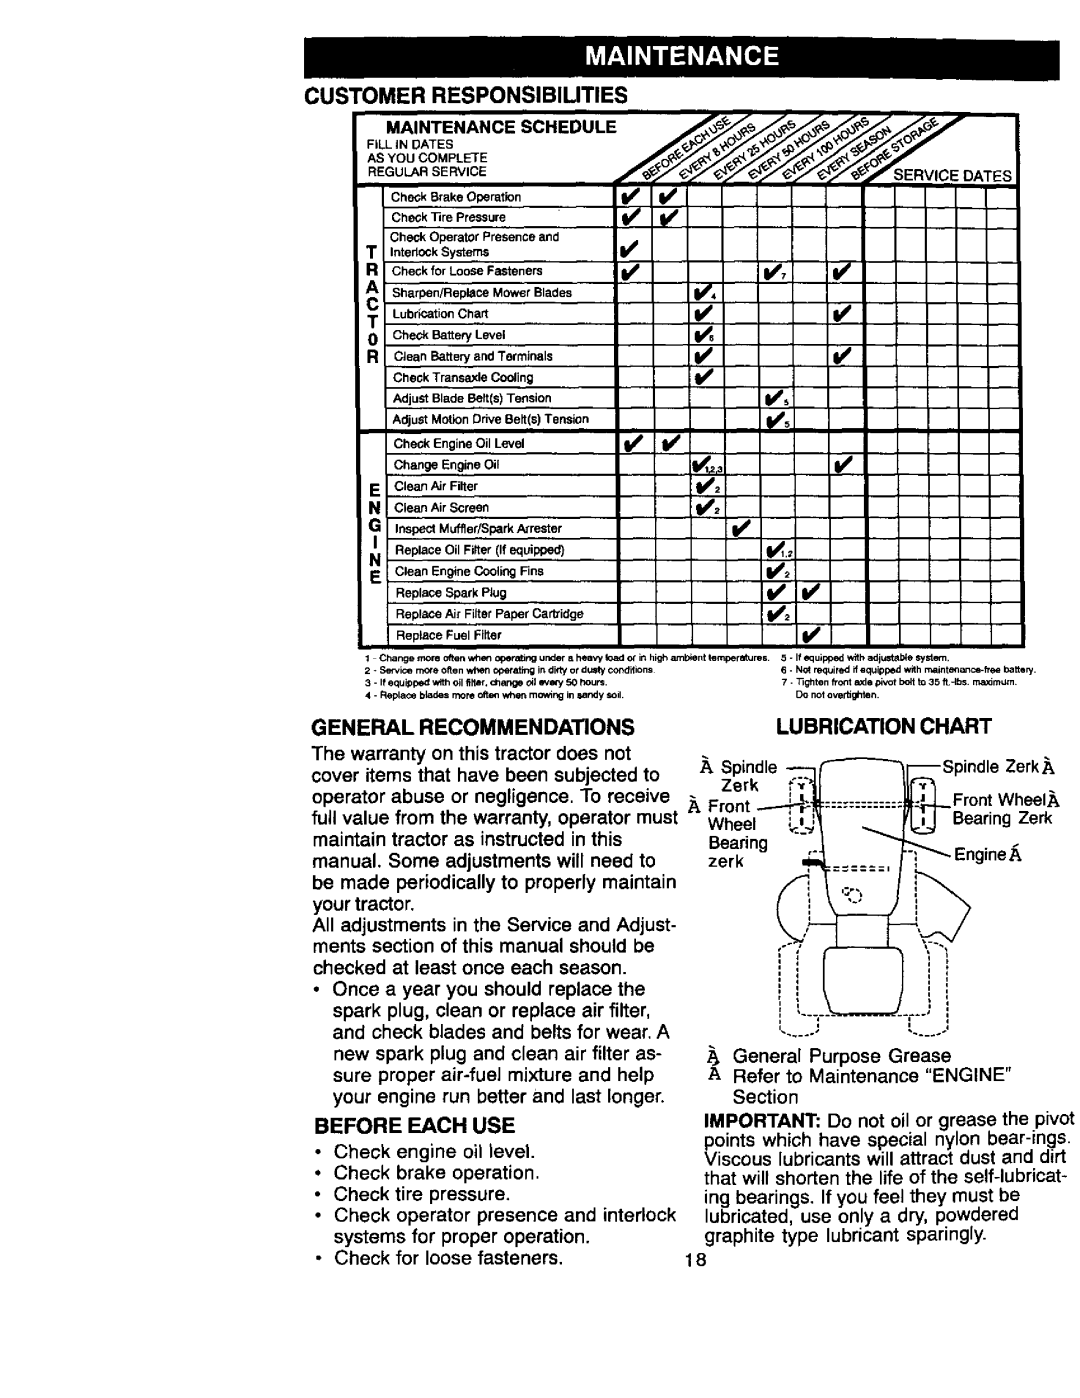 Craftsman 917.27066 owner manual Customer, General Recommendations Lubrication Chart, Before Each USE 